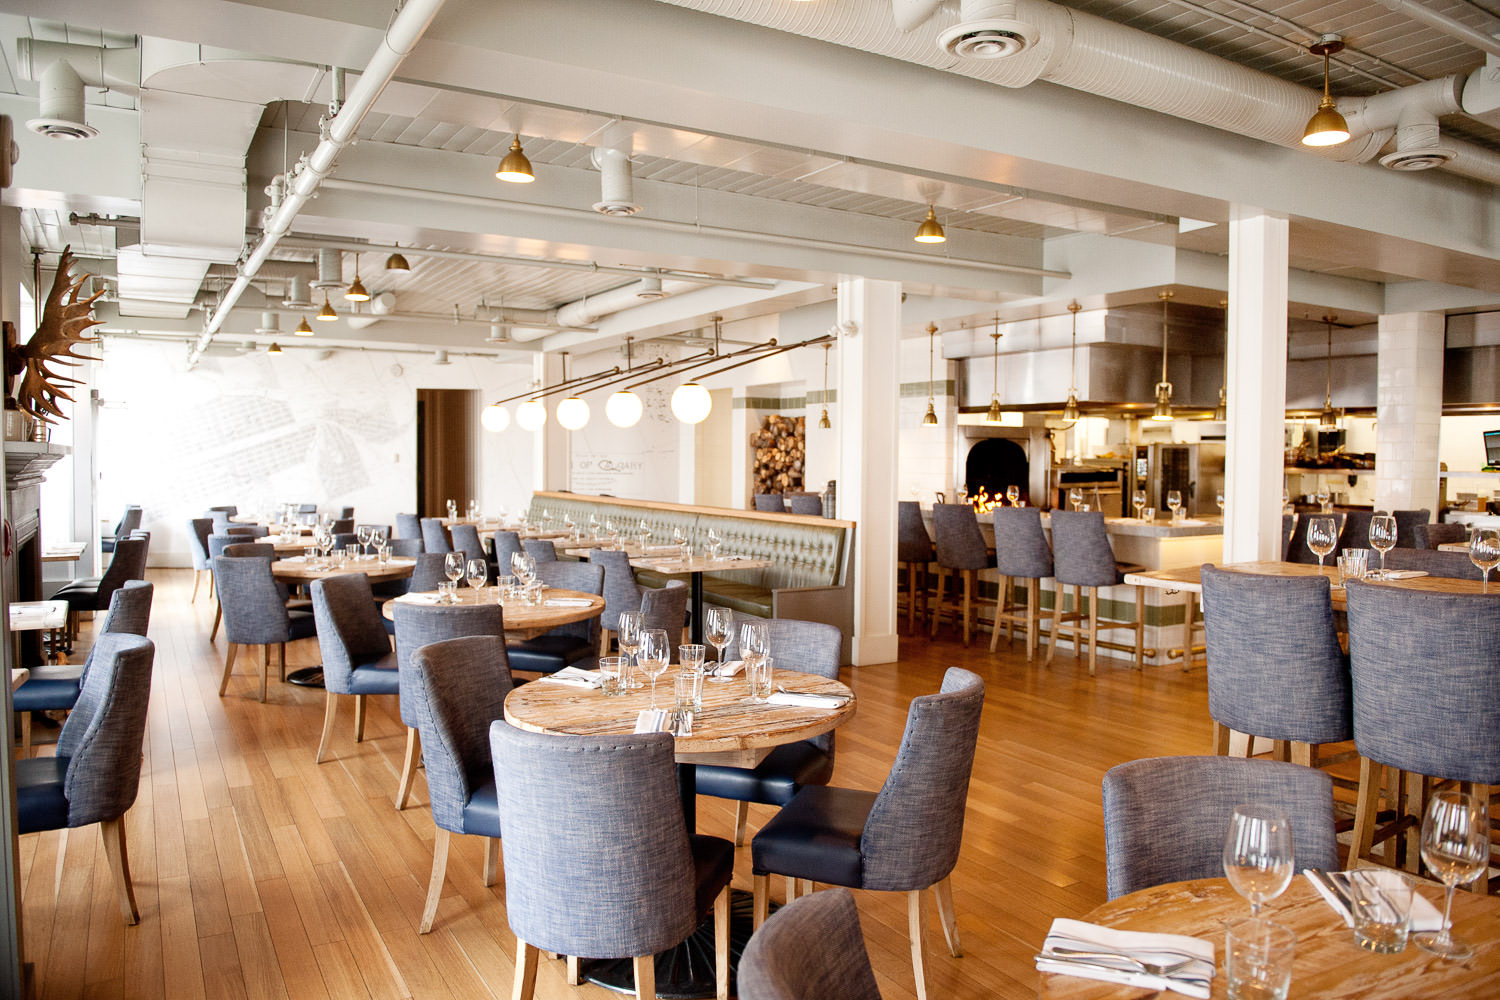 Main dining room at The Nash in Calgary captured by Tara Whittaker Photography